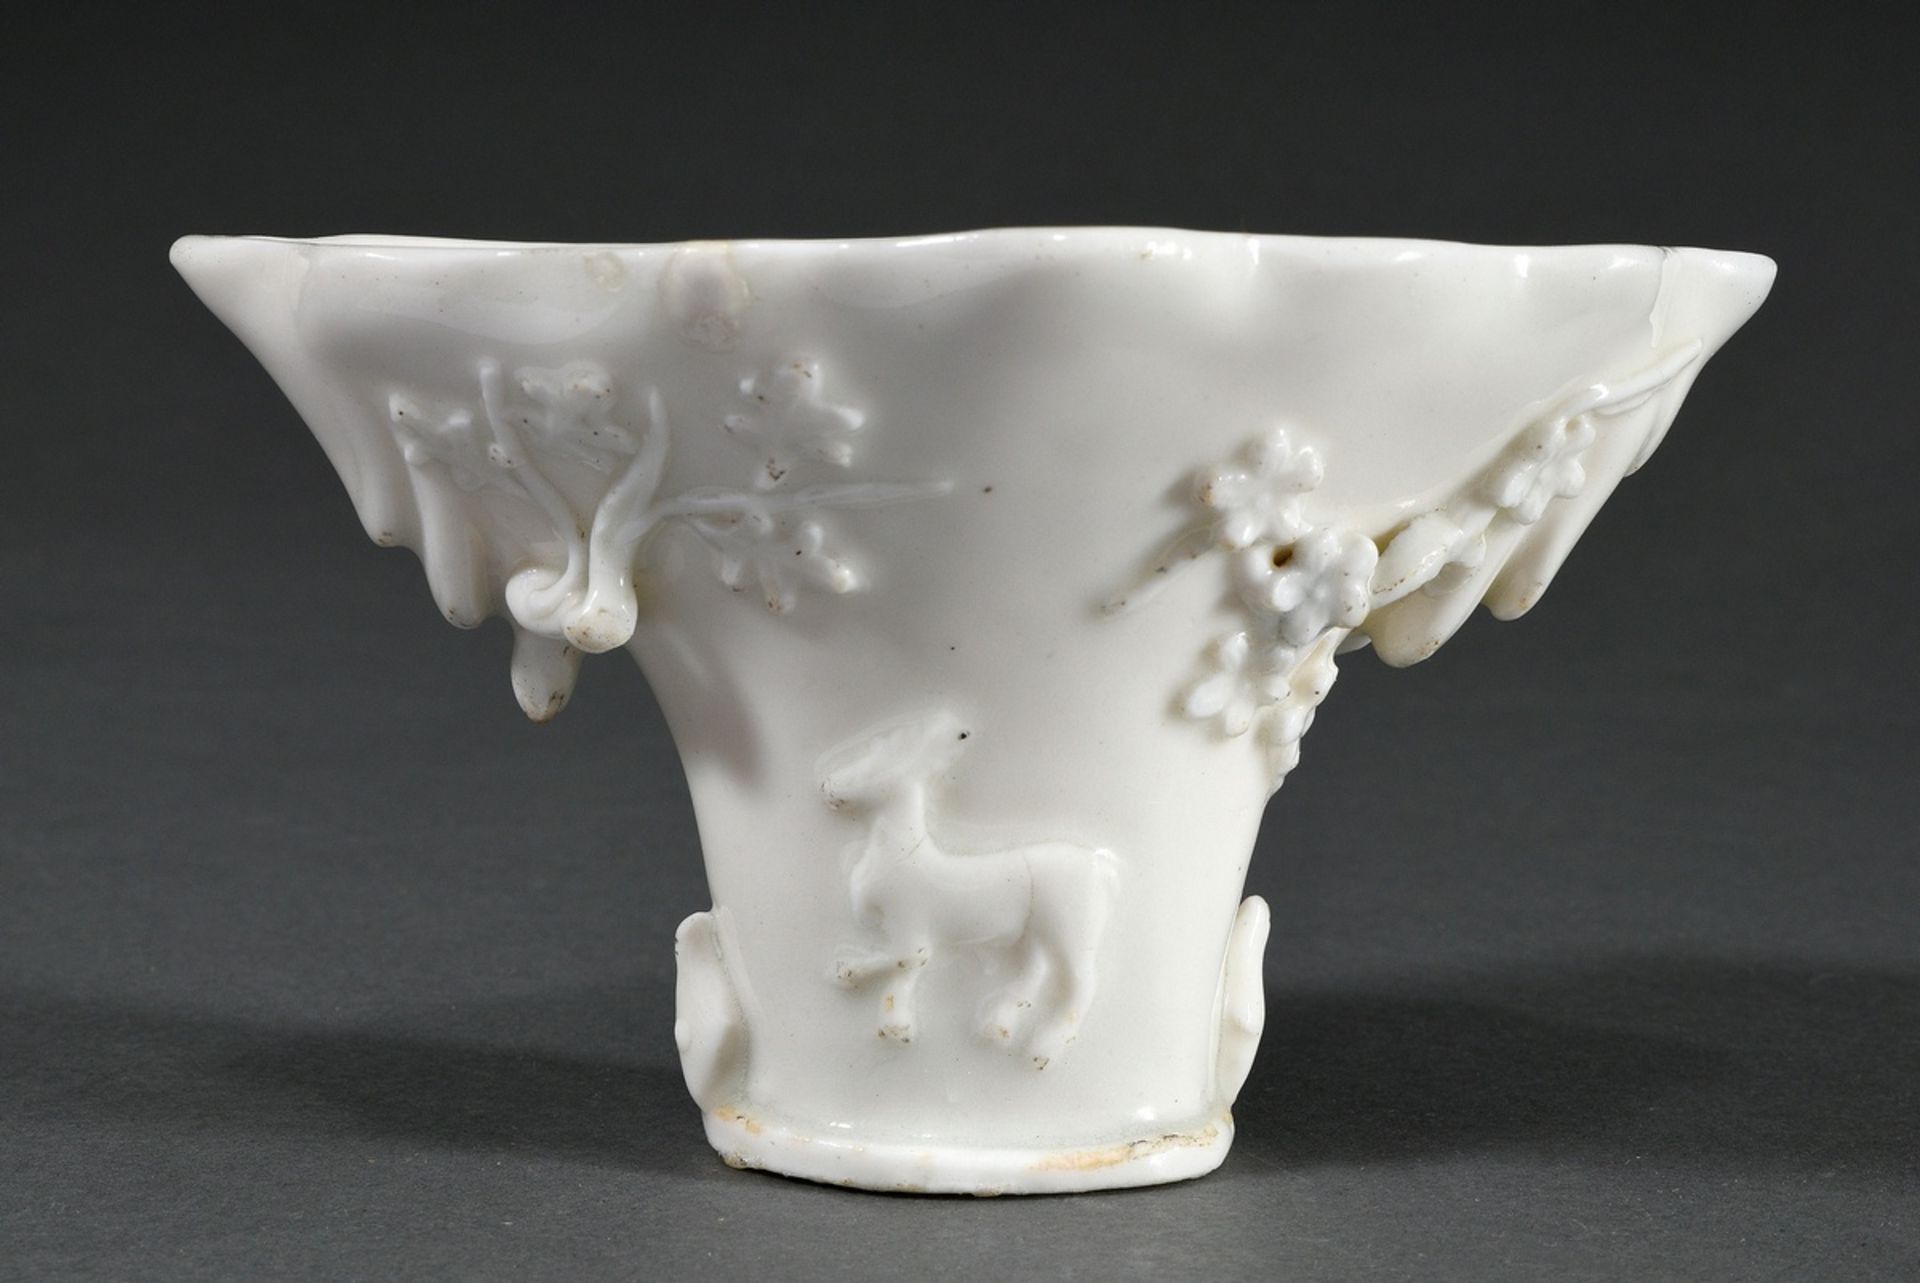 Blanc de Chine drinking cup with decoration in relief "dragon, deer and twigs" in the form of a rhi - Image 4 of 7